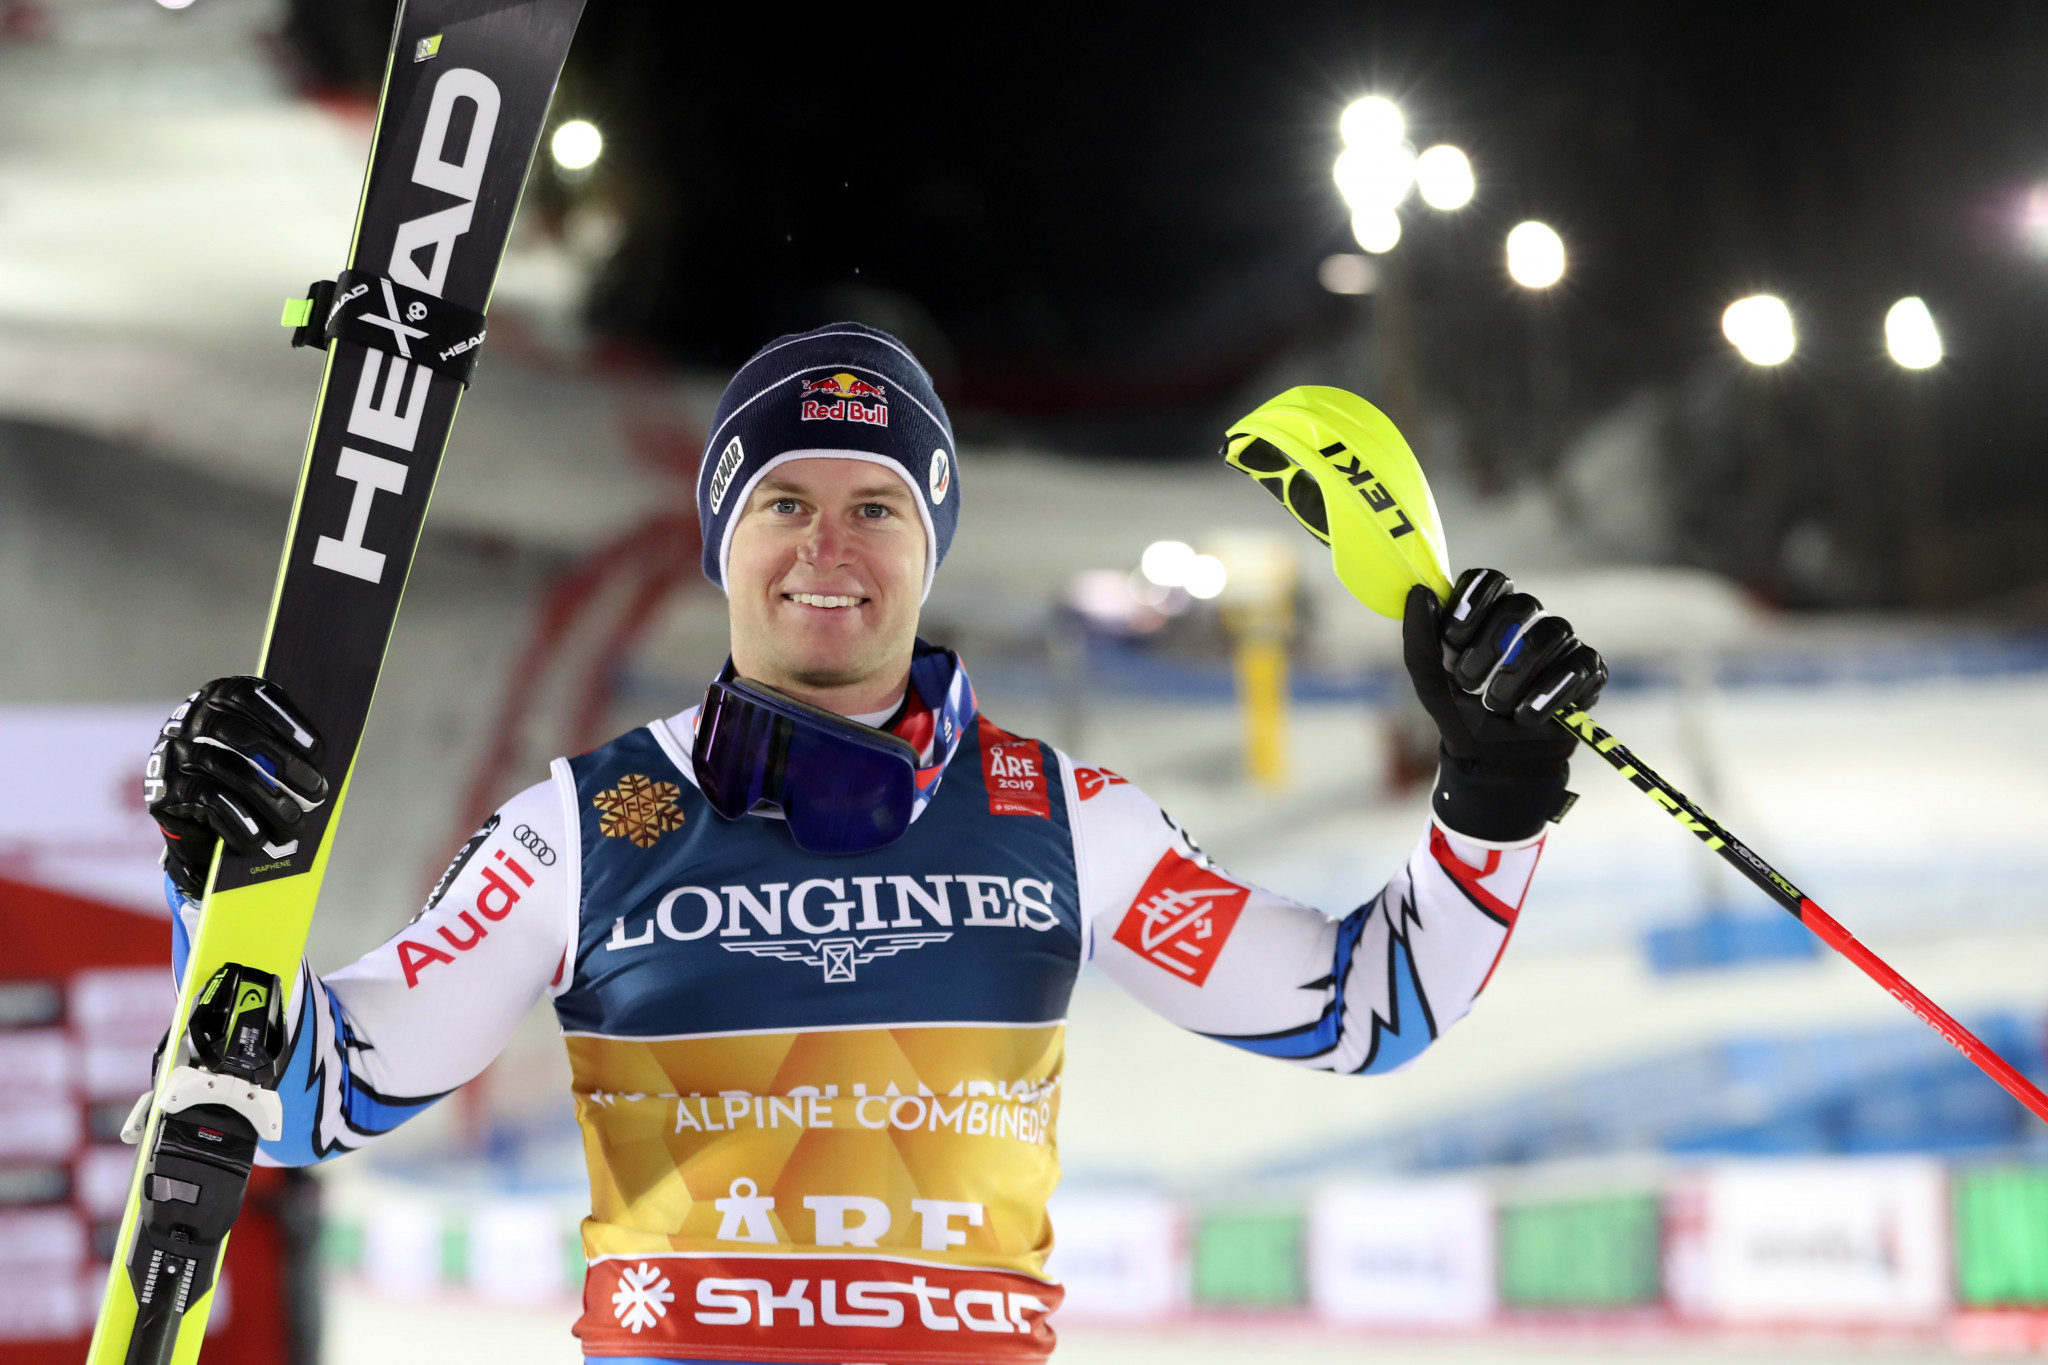 Alexis Pinturault won the men's Alpine combined gold in Åre ©Getty Images